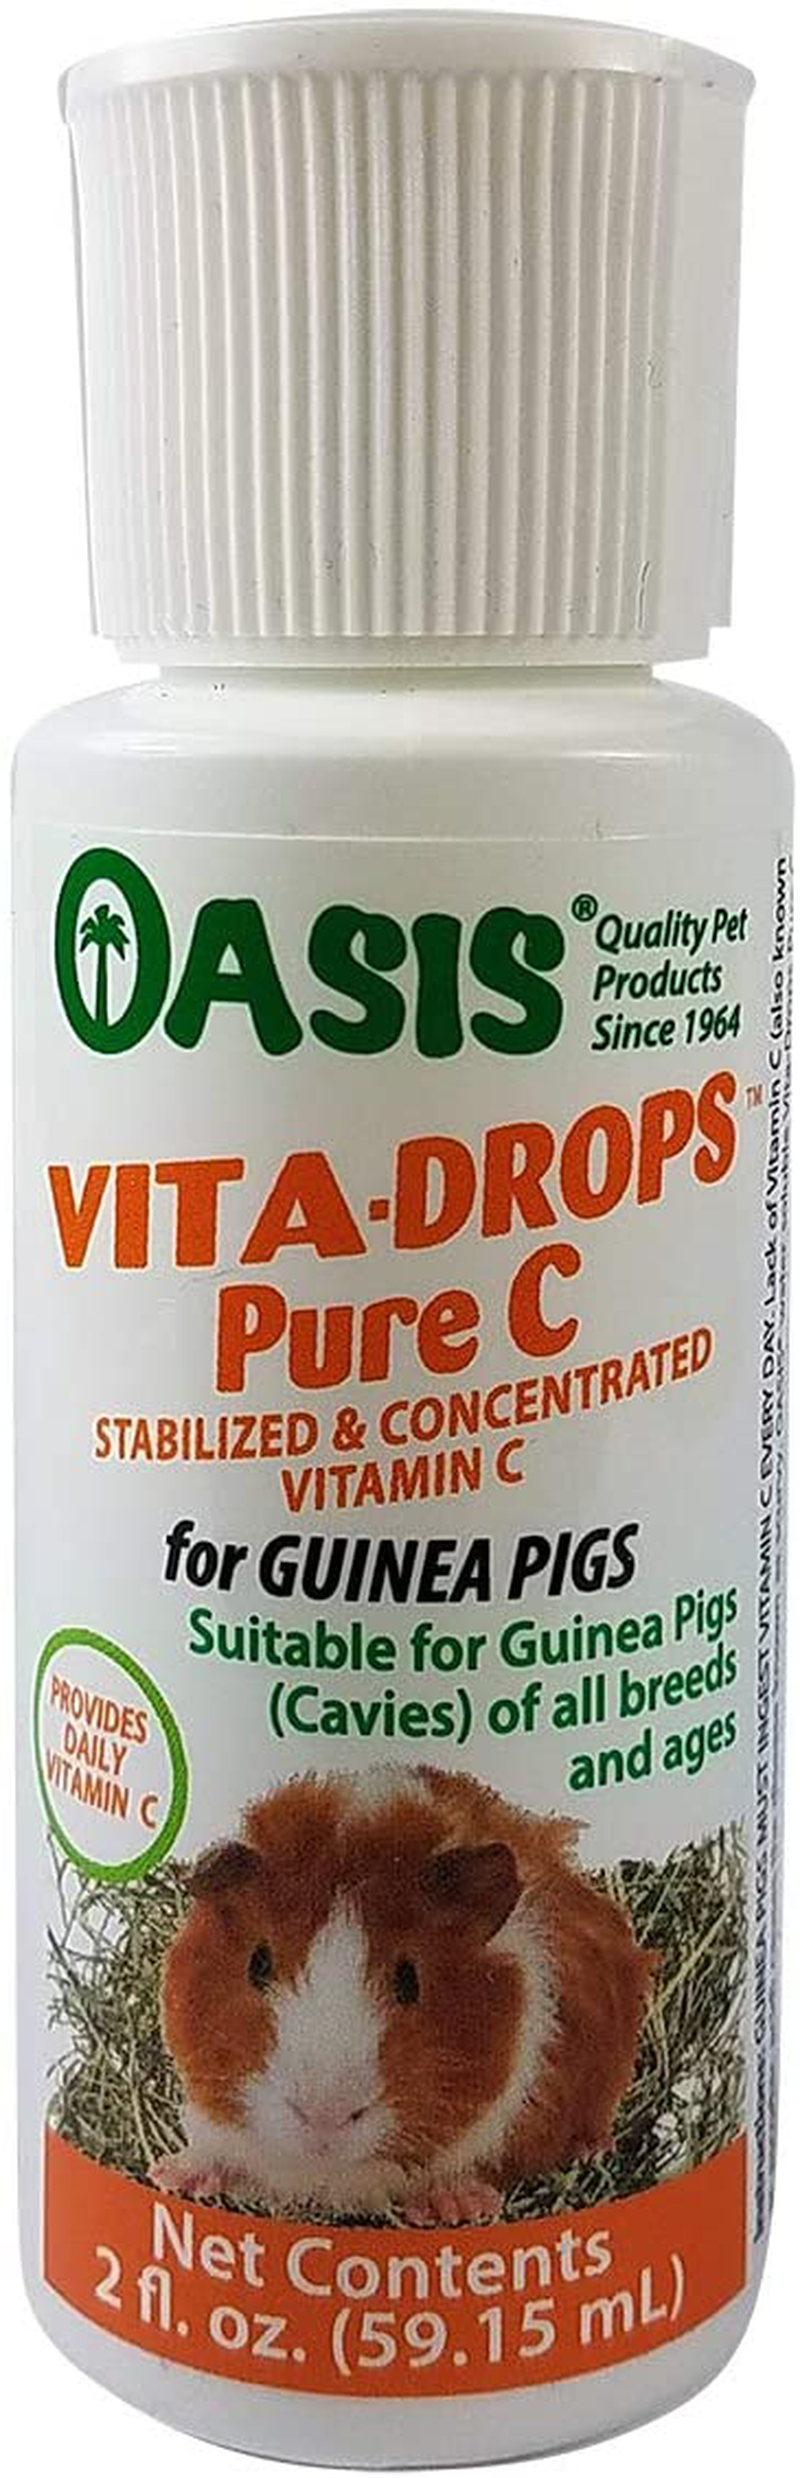 OASIS #80254 Vita Drops-Pure C for Guinea Pig, 2-Ounce, Packaging May Vary